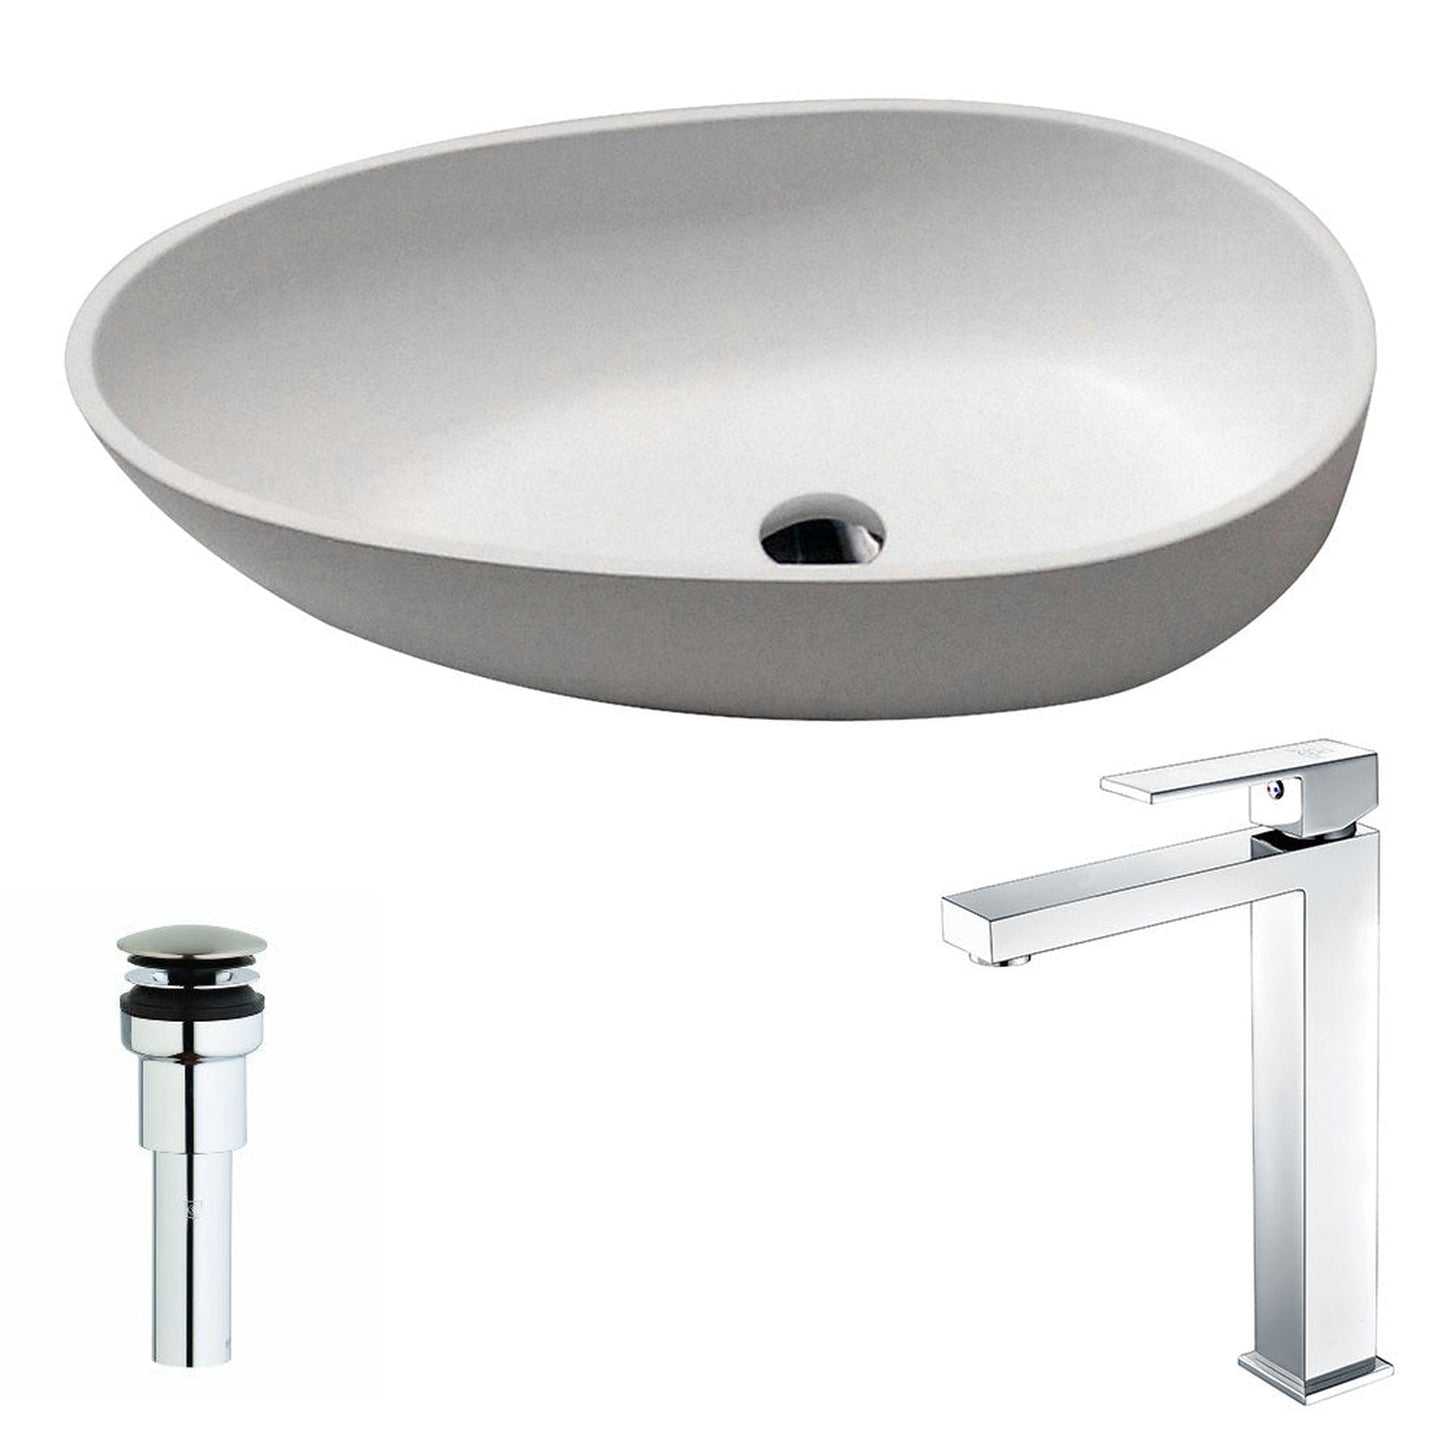 ANZZI Trident Series 24" x 16" Oval Shape Vessel Sink in Matte White Finish With Polished Chrome Enti Faucet and Pop-up Drain